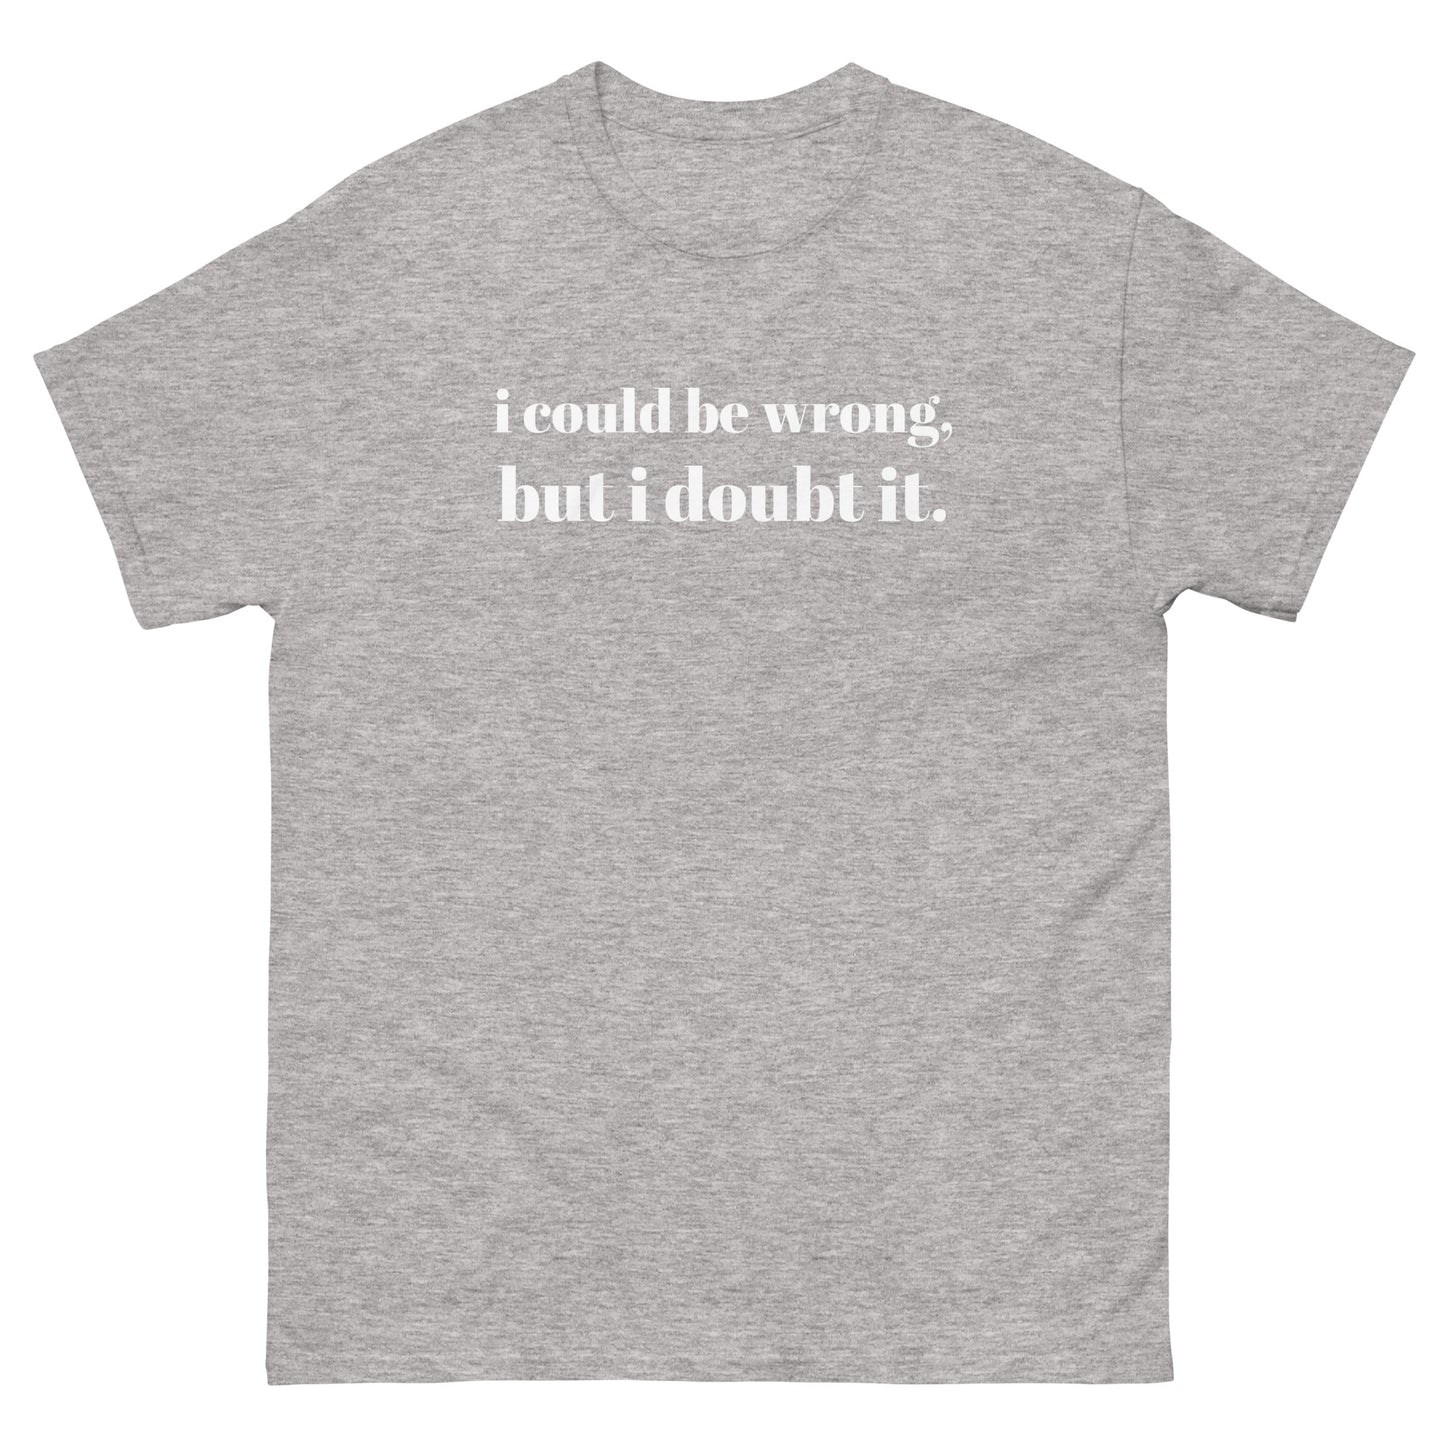 i could be wrong, but i doubt it Tshirt  - Unisex